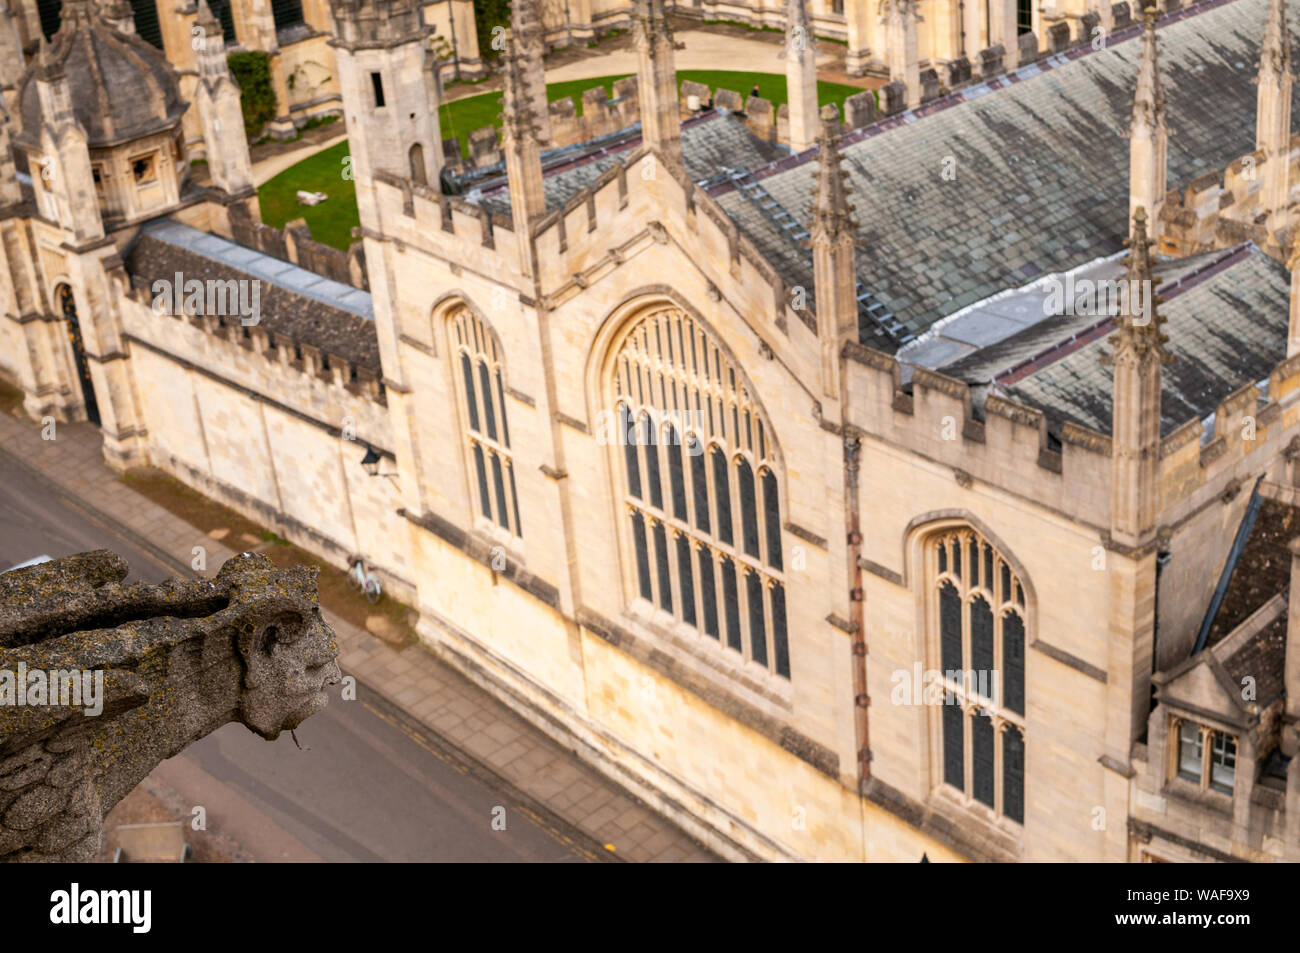 A high up view of Cattle street and the Codrington Library with a gargoyle / grotesque looking down. Oxford, England. Stock Photo